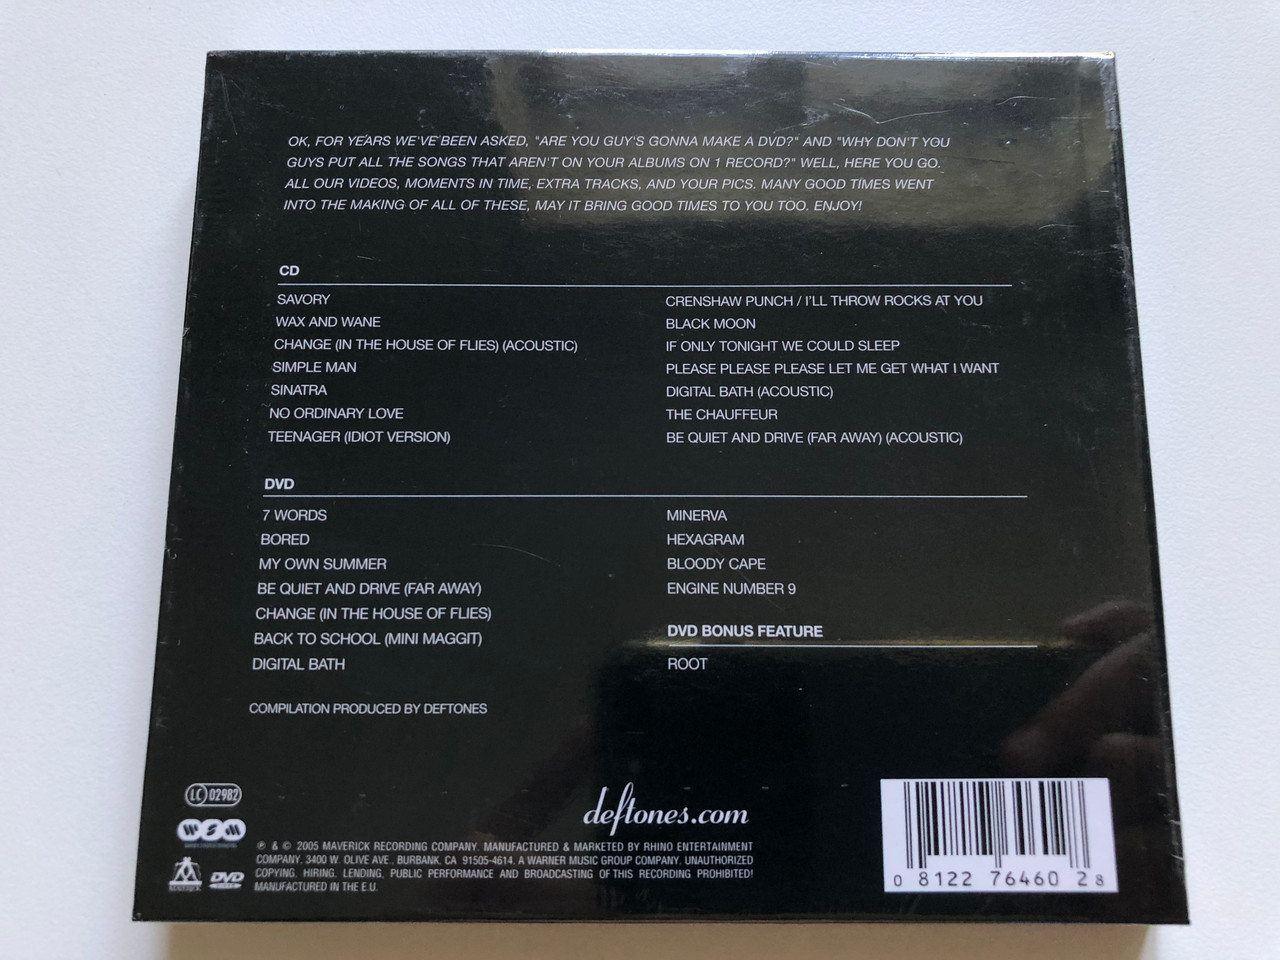 https://cdn10.bigcommerce.com/s-62bdpkt7pb/products/0/images/244309/Deftones_B-Sides_Rarities_CD_14_Rare_Unreleased_Songs_From_The_Deftones_Vaults_Spanning_The_Last_Dacade_DVD_The_Complete_Of_Deftones_Music_Videos_Together_For_The_First_Time_Mave__23836.1659367335.1280.1280.JPG?c=2&_gl=1*ptr6lx*_ga*MjA2NTIxMjE2MC4xNTkwNTEyNTMy*_ga_WS2VZYPC6G*MTY1OTM2MTk0MC41MDcuMS4xNjU5MzY2NzUzLjQz